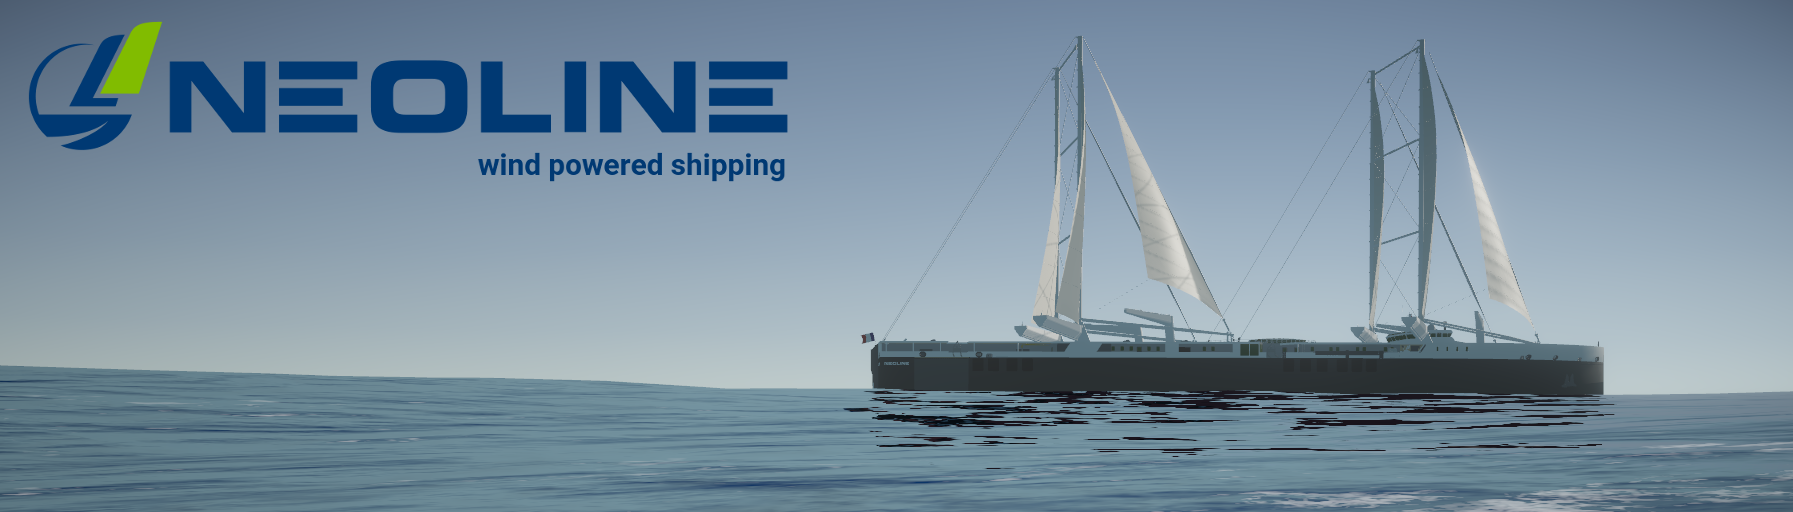 NEOLINE wind powered shipping bannière